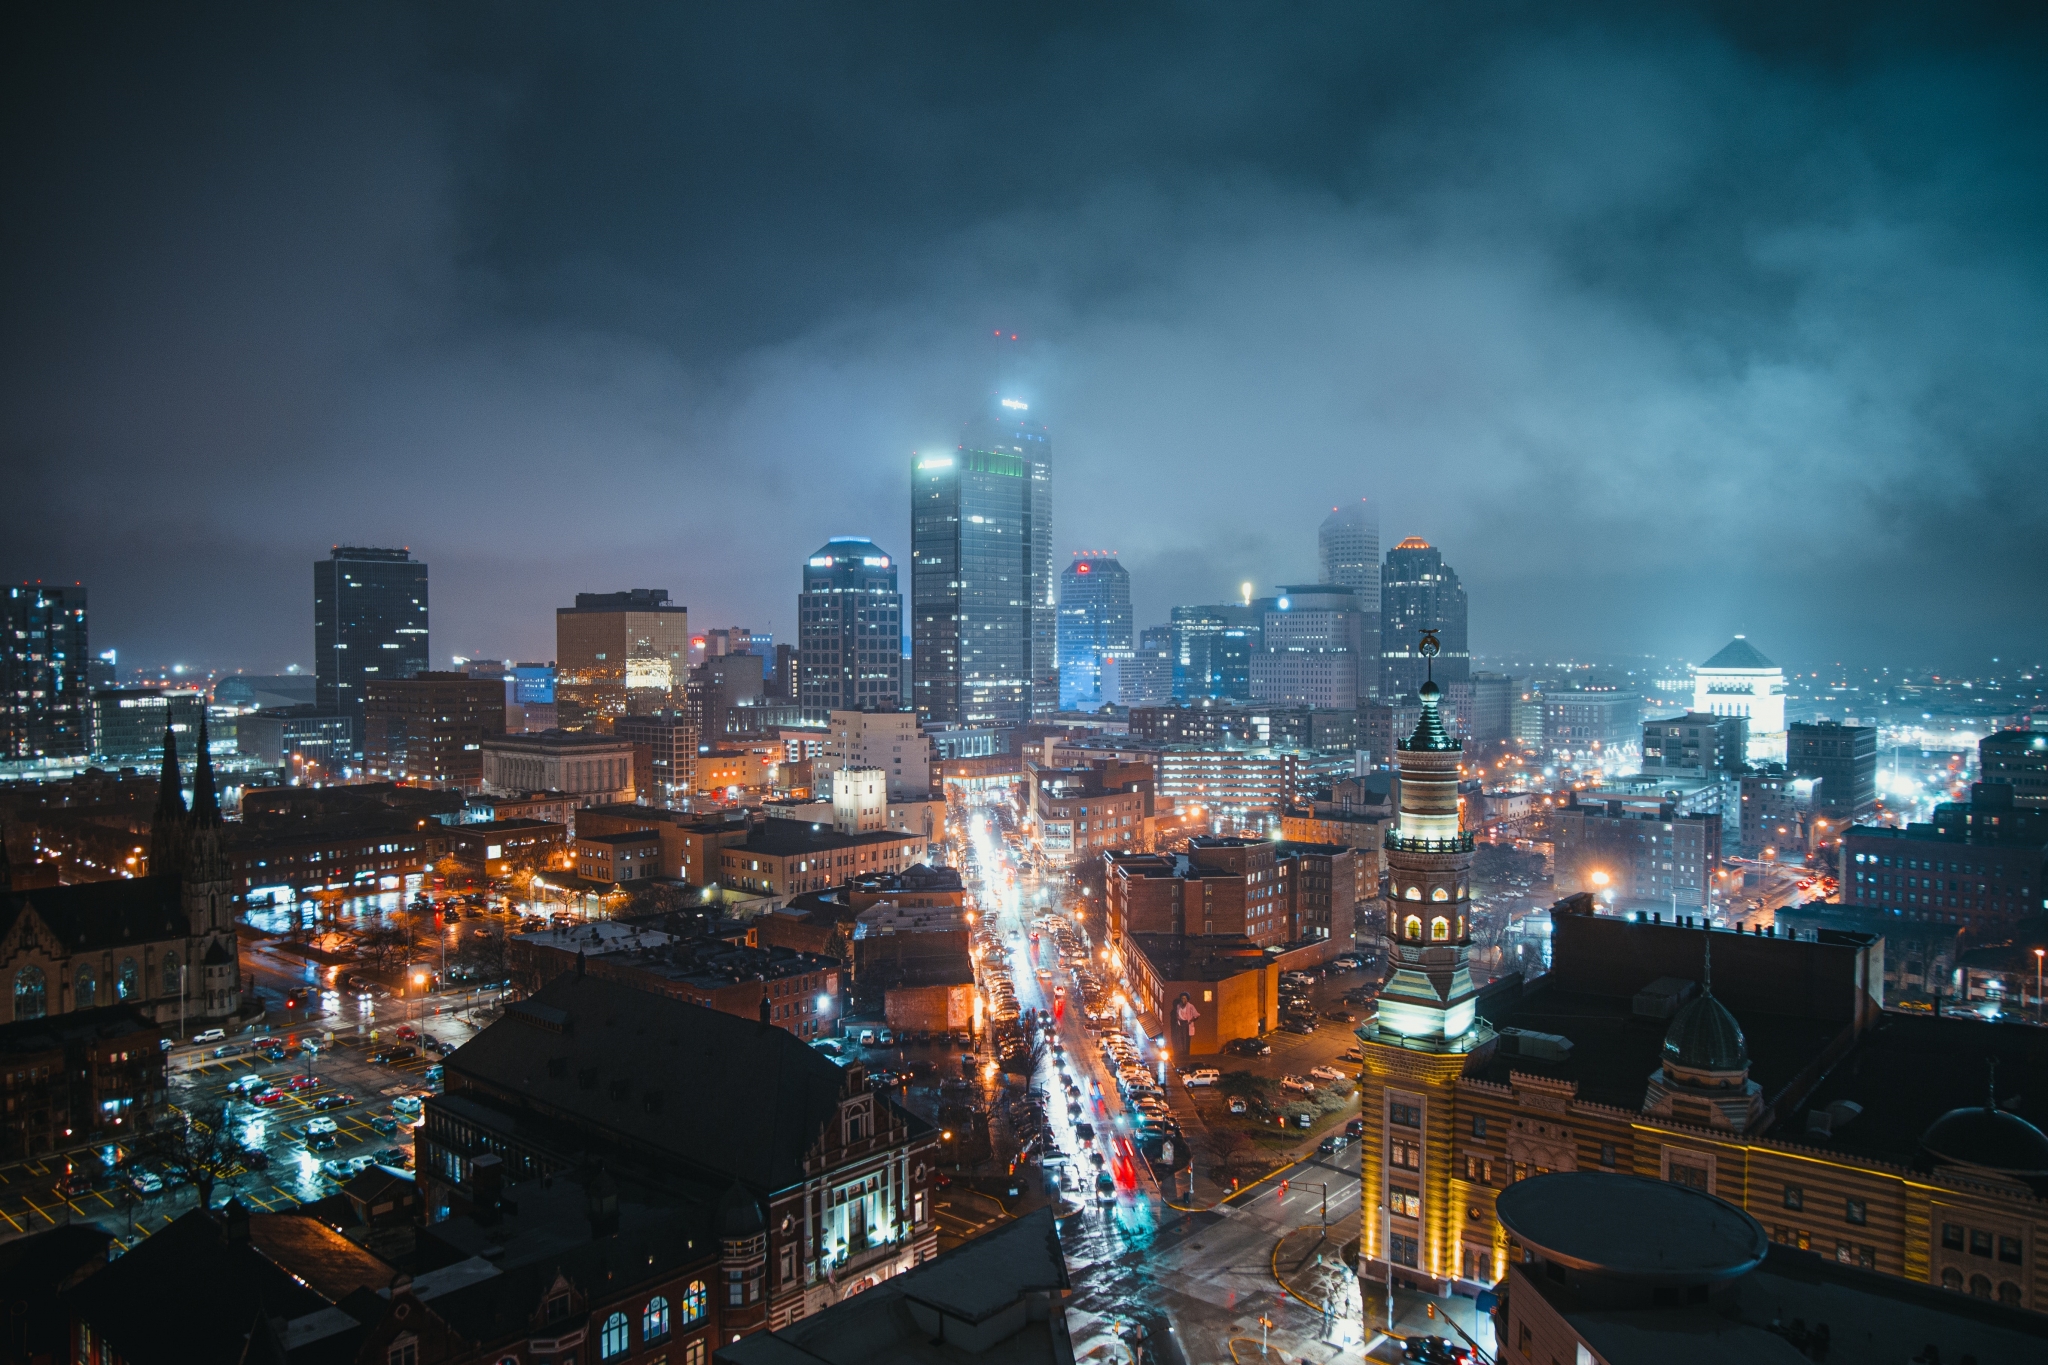 Night view of Indianapolis, Indiana